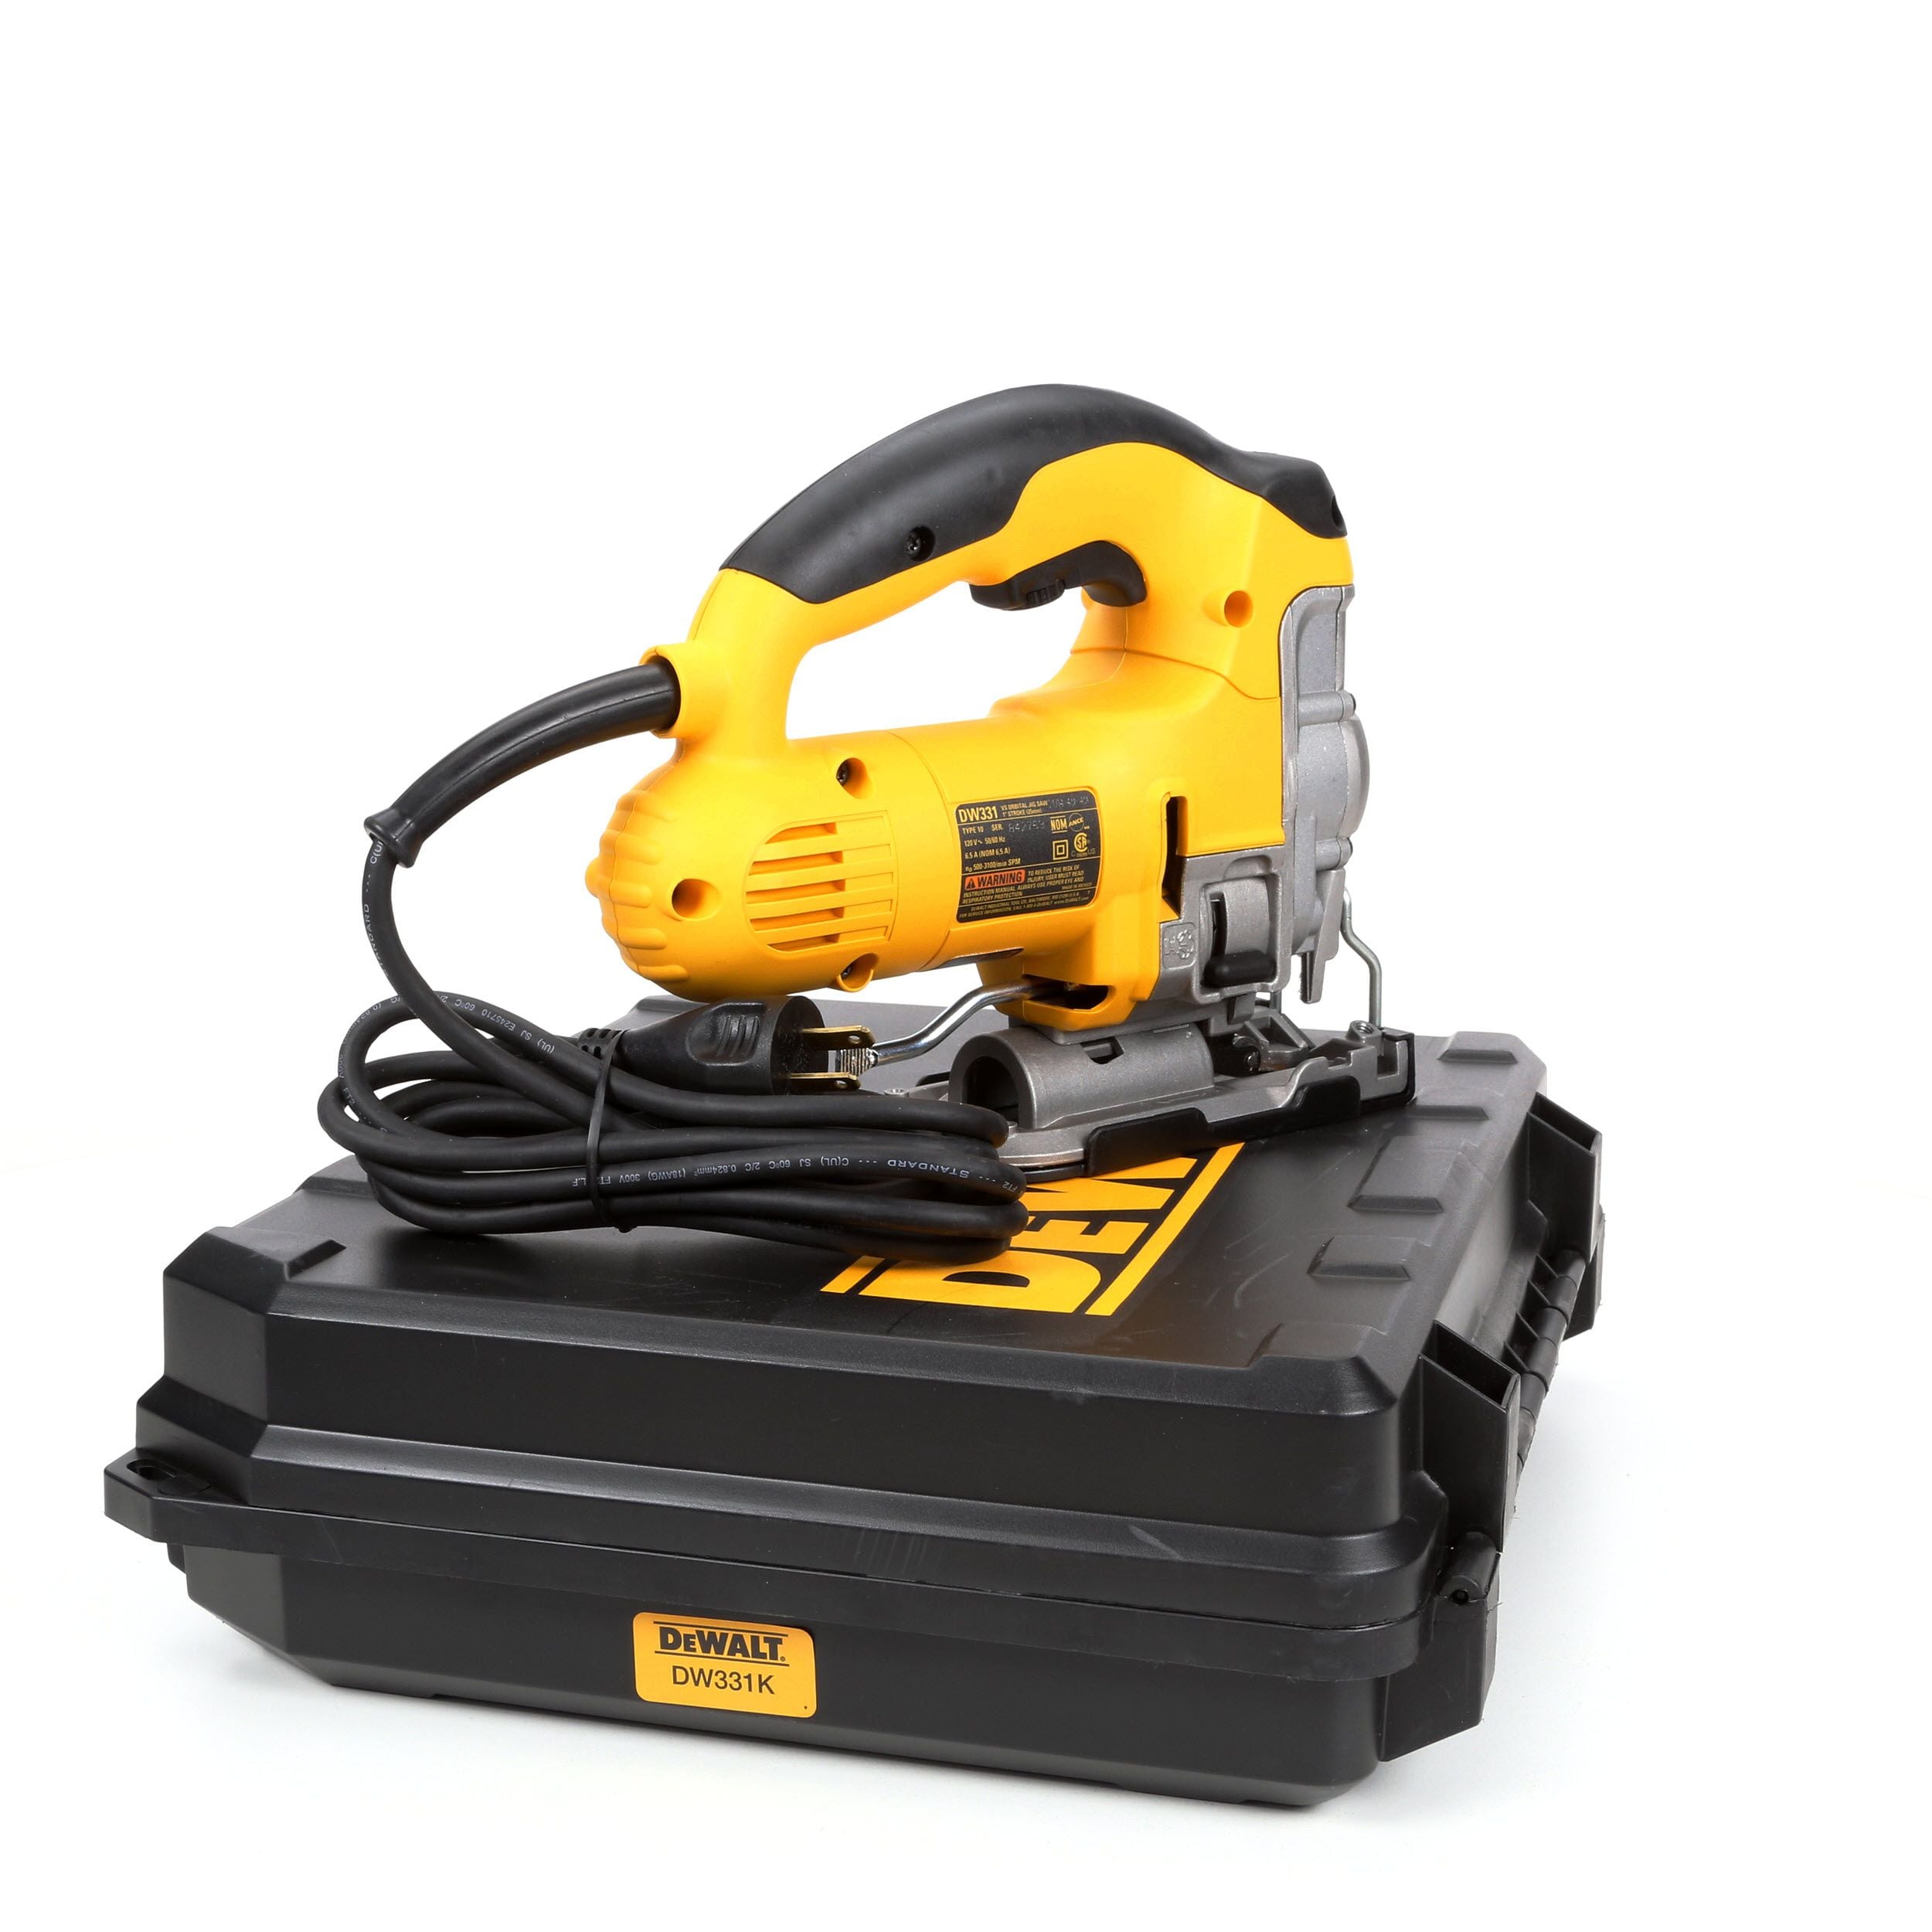 DEWALT Variable Keyless Corded in the Jigsaws department at Lowes.com